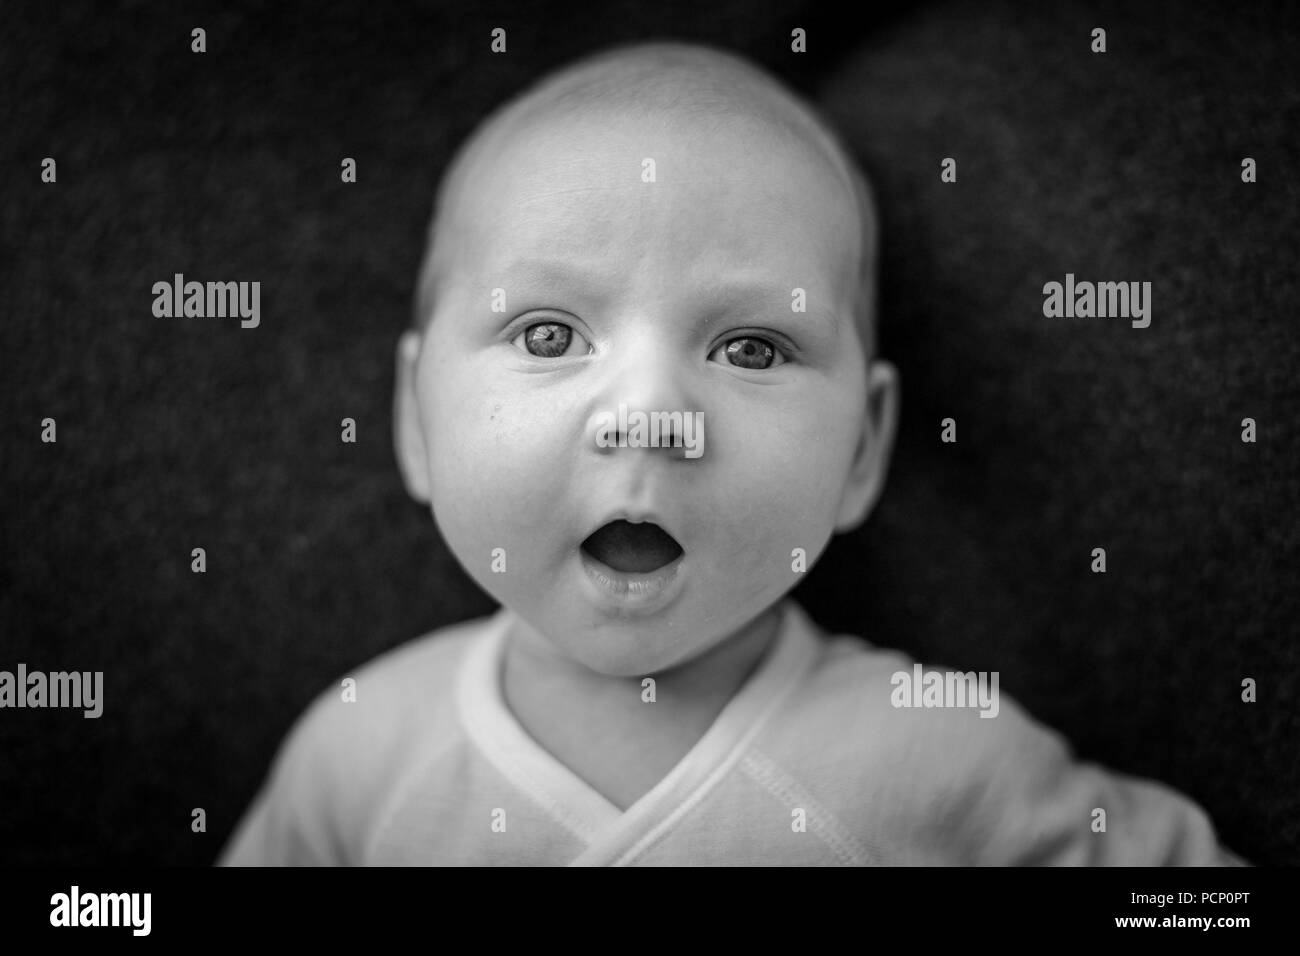 Baby with opened mouth astonished looking, portrait, b/w Stock Photo